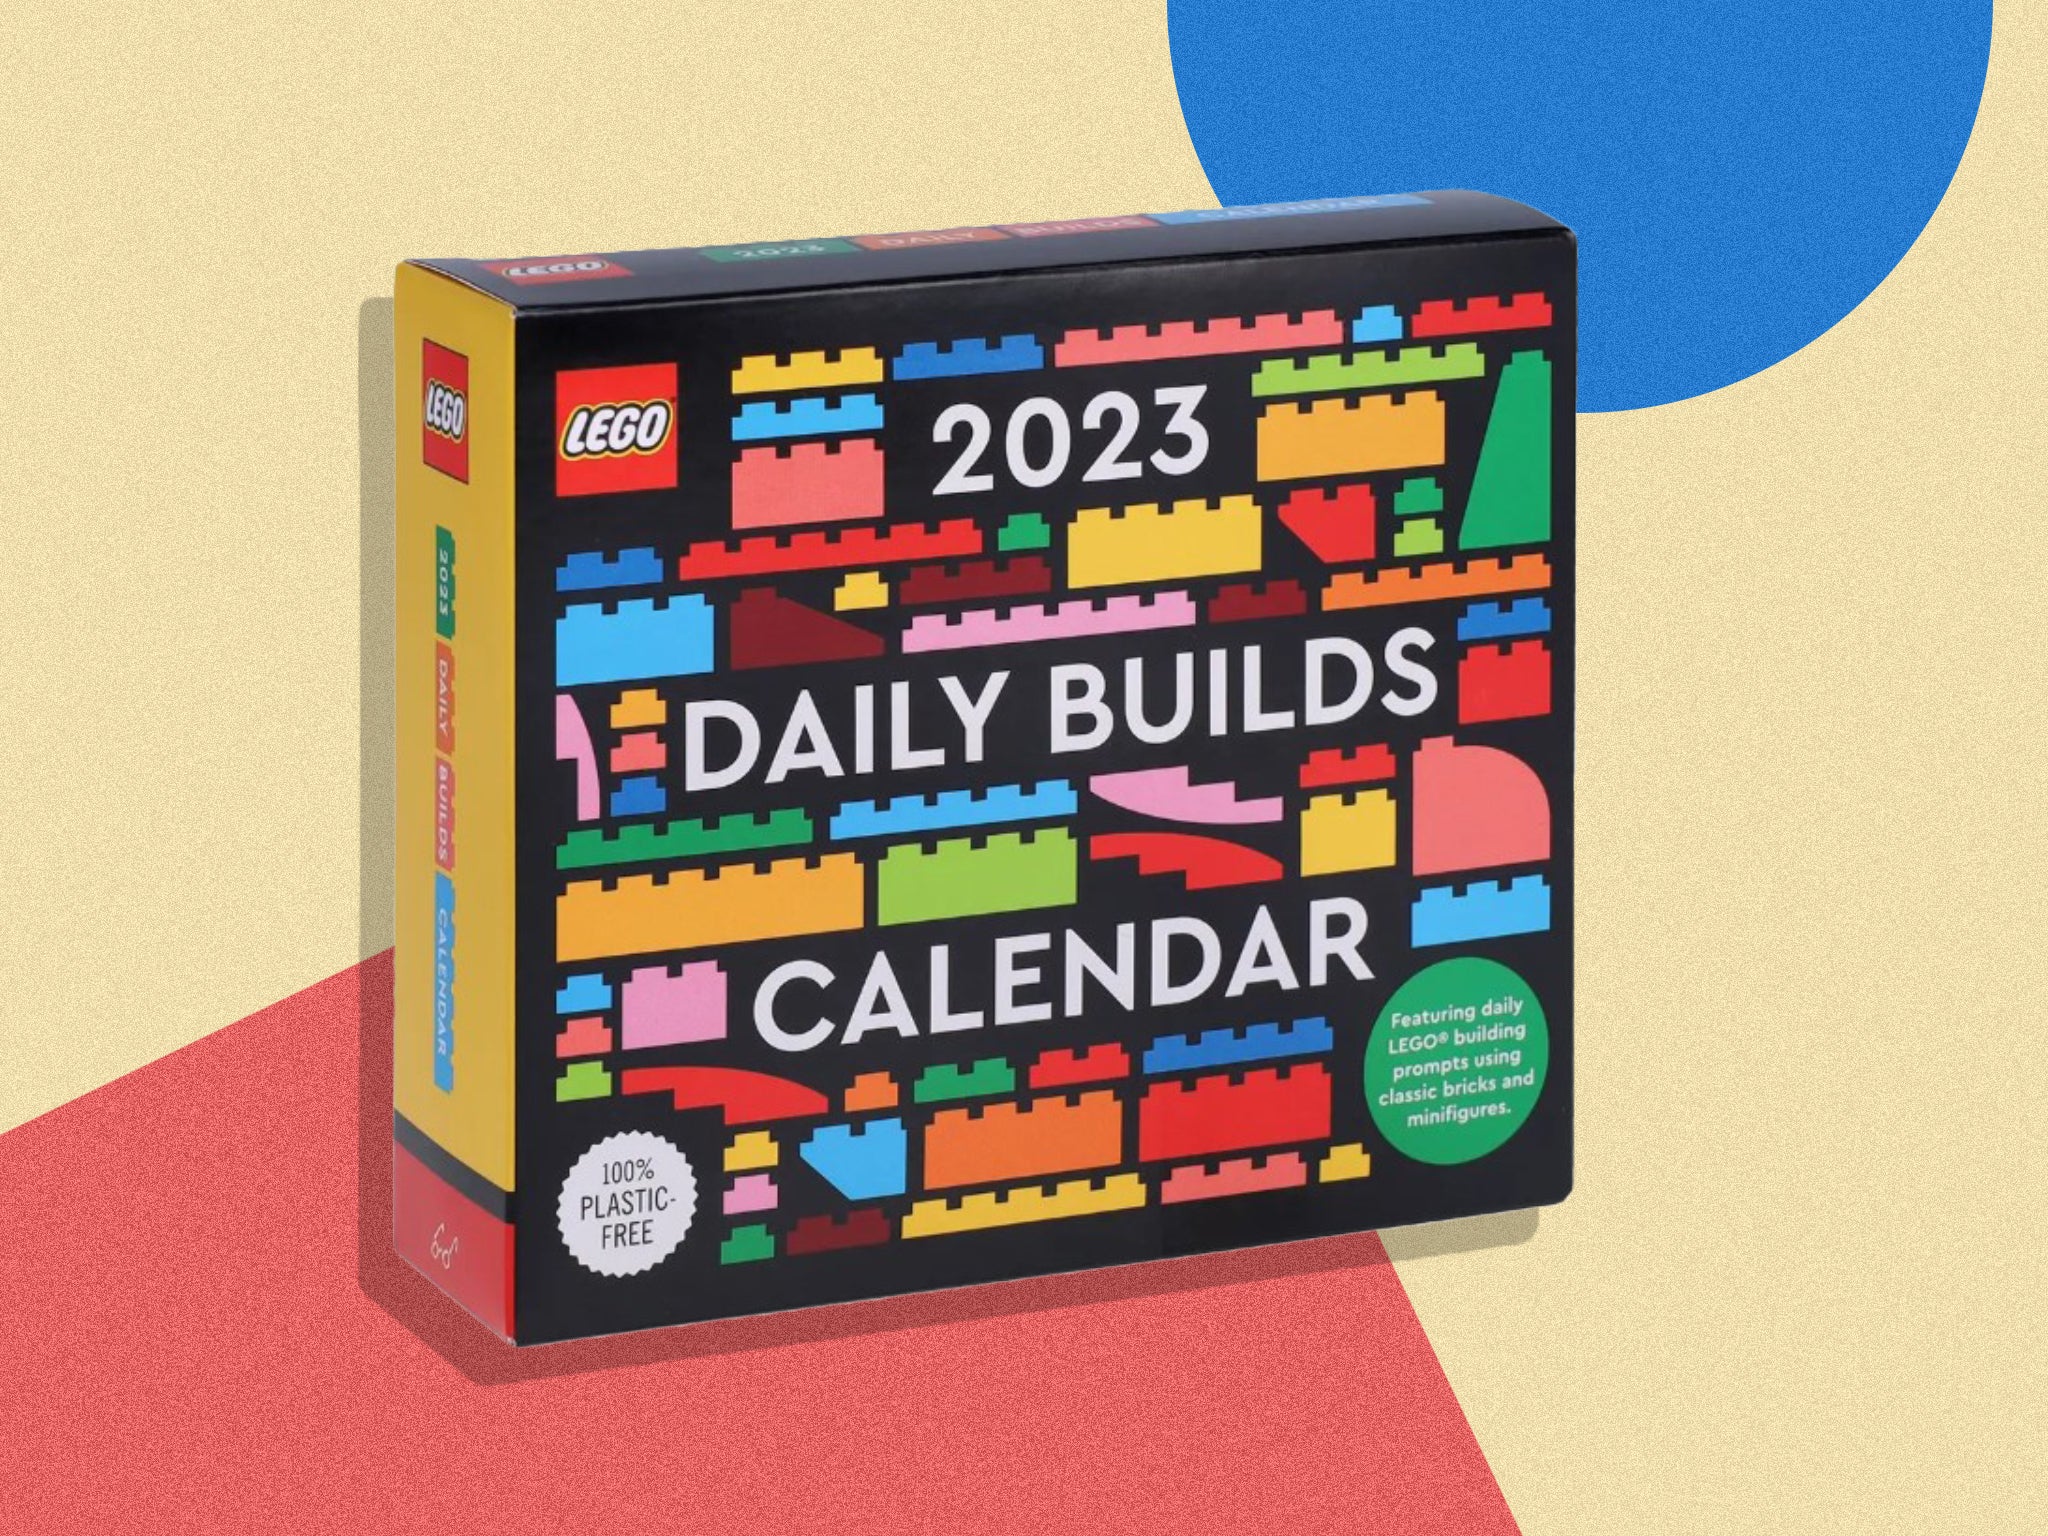 Make 2023 the most constructive year of your life with this tear-away calendar